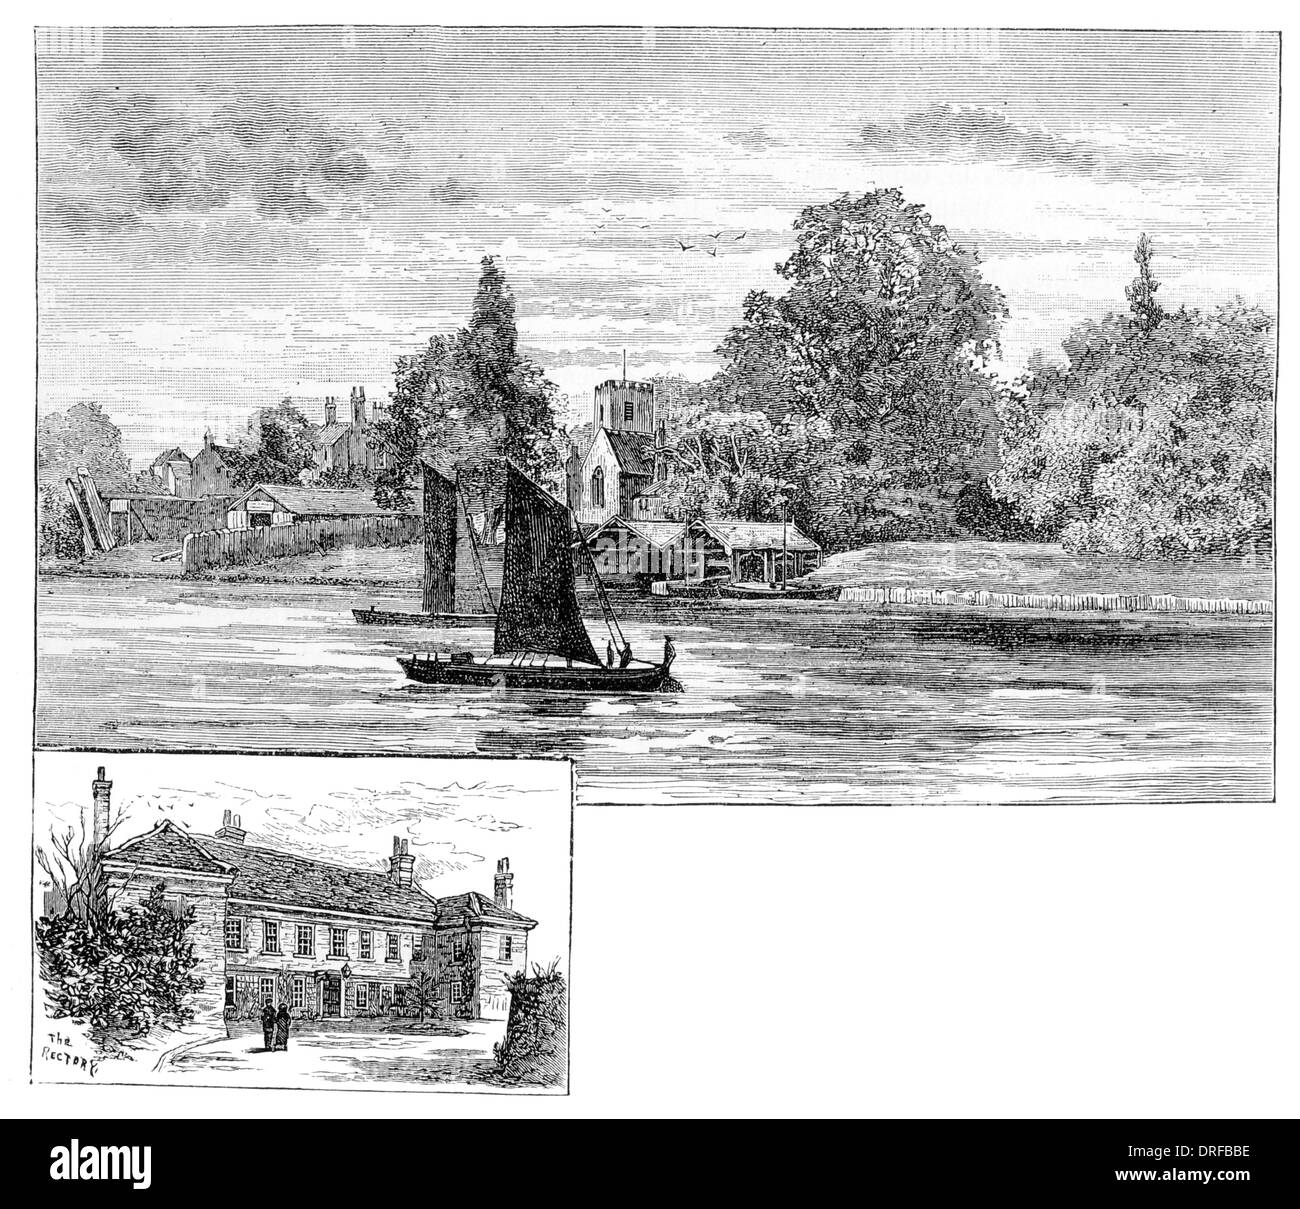 Shepperton, from the river Thames with St Nicholas Church and Shepperton    Rectory, Spelthorne, Middlesex Surrey circa 1880 Stock Photo